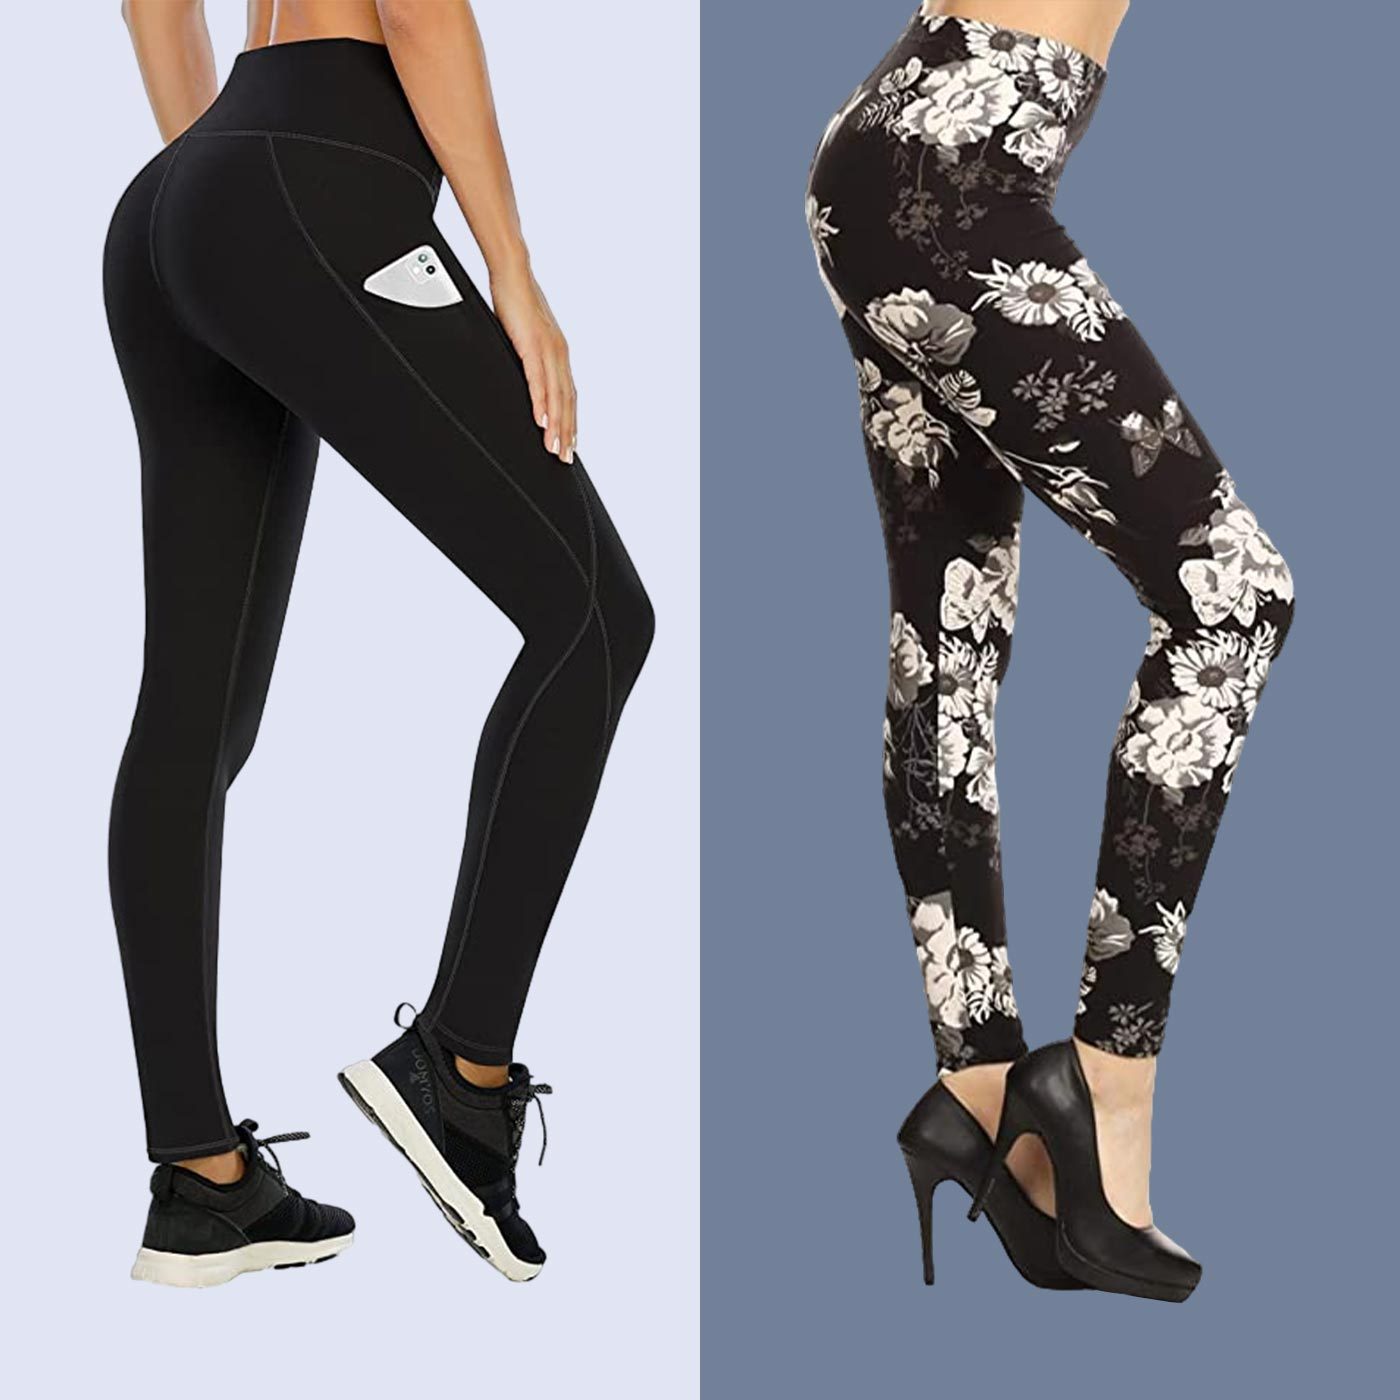 The 9 Best  Leggings, According to Fellow Shoppers